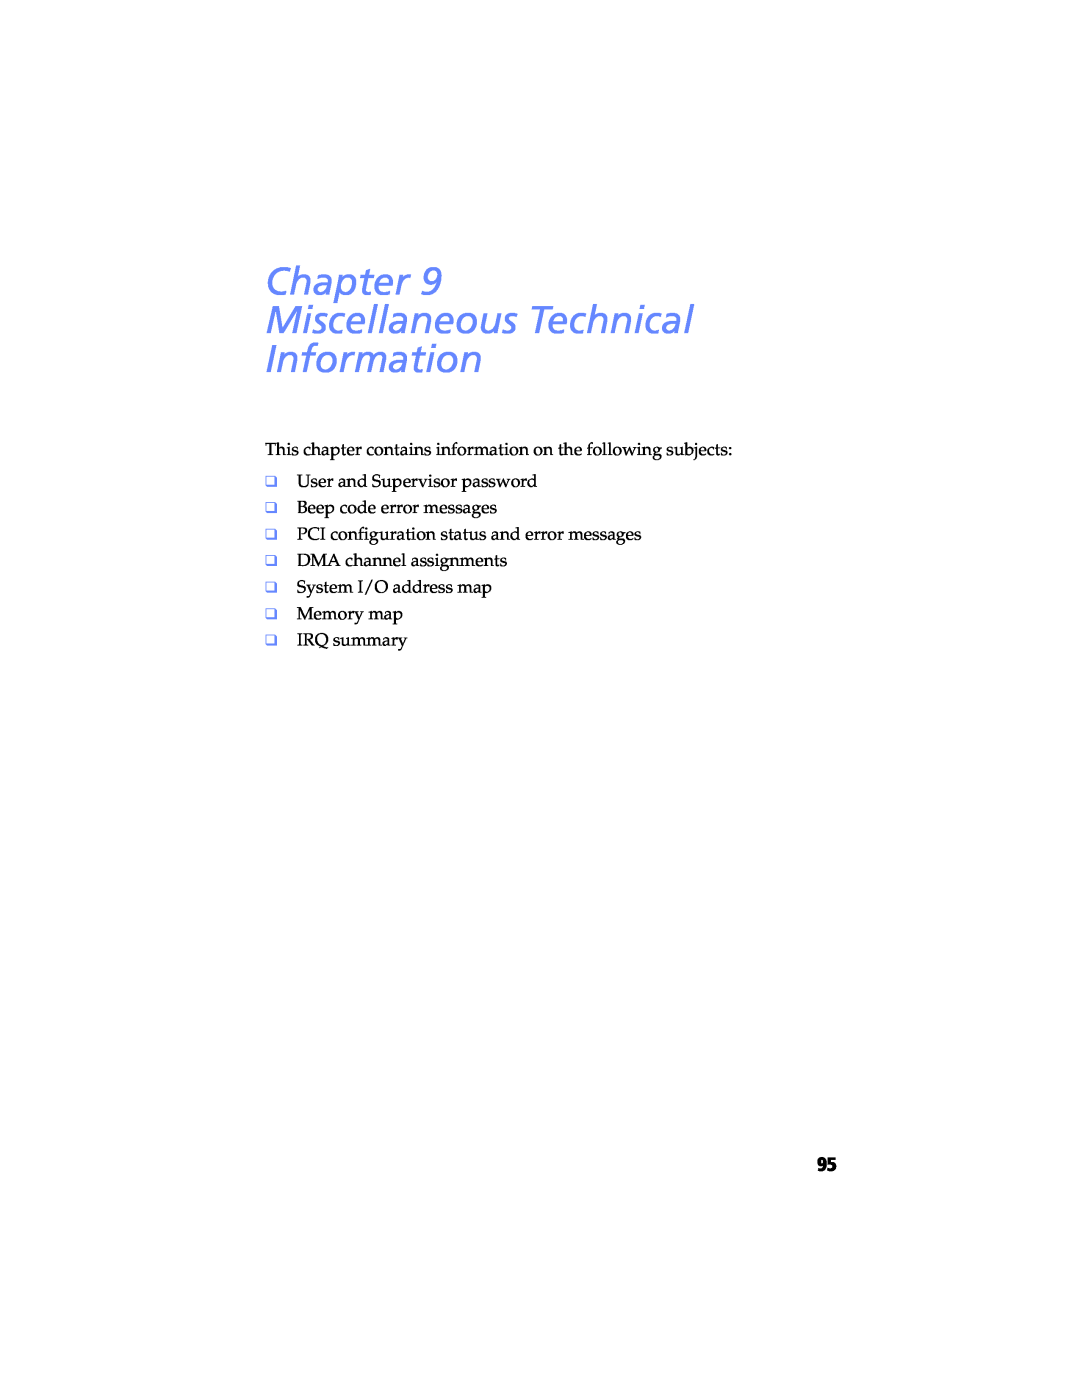 Sony PCV-RX490TV Chapter Miscellaneous Technical Information, This chapter contains information on the following subjects 